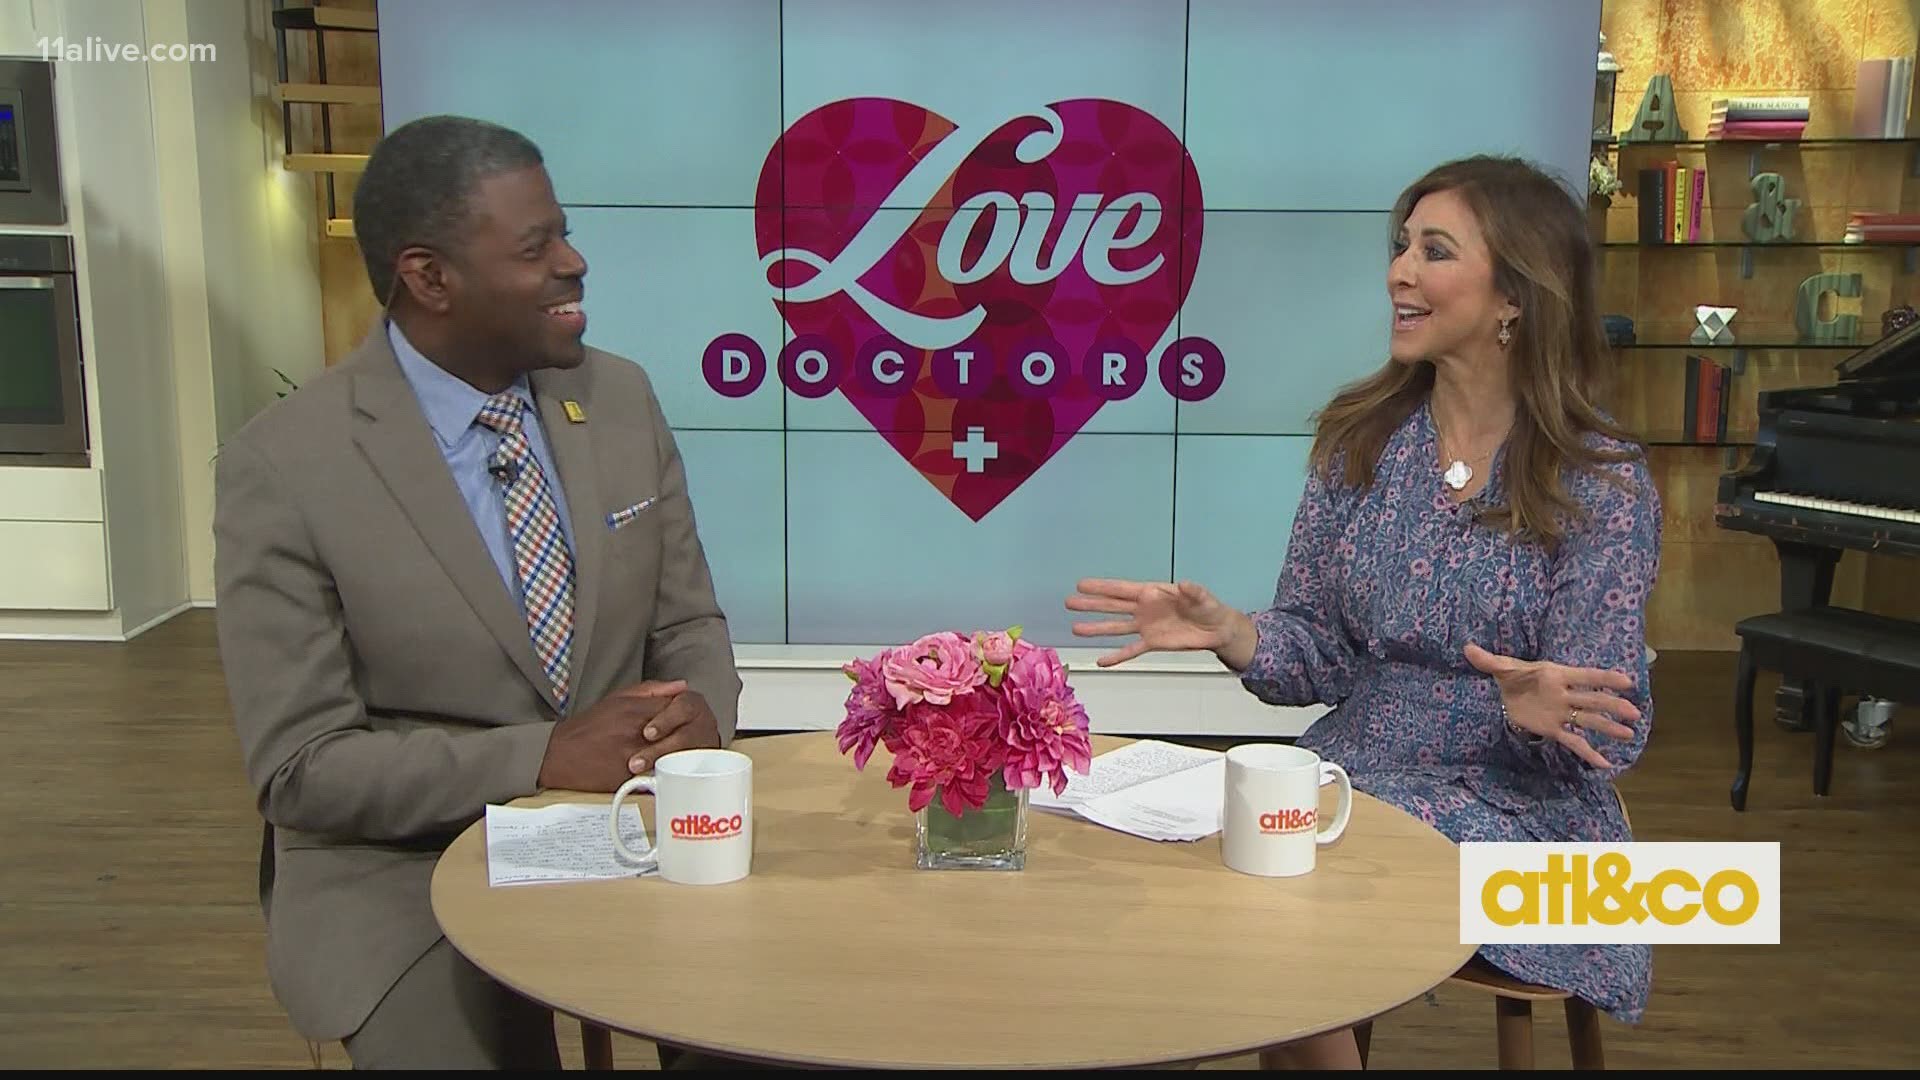 Love Drs. Christine Pullara and Chesley McNeil help guide sweethearts unlucky in love.